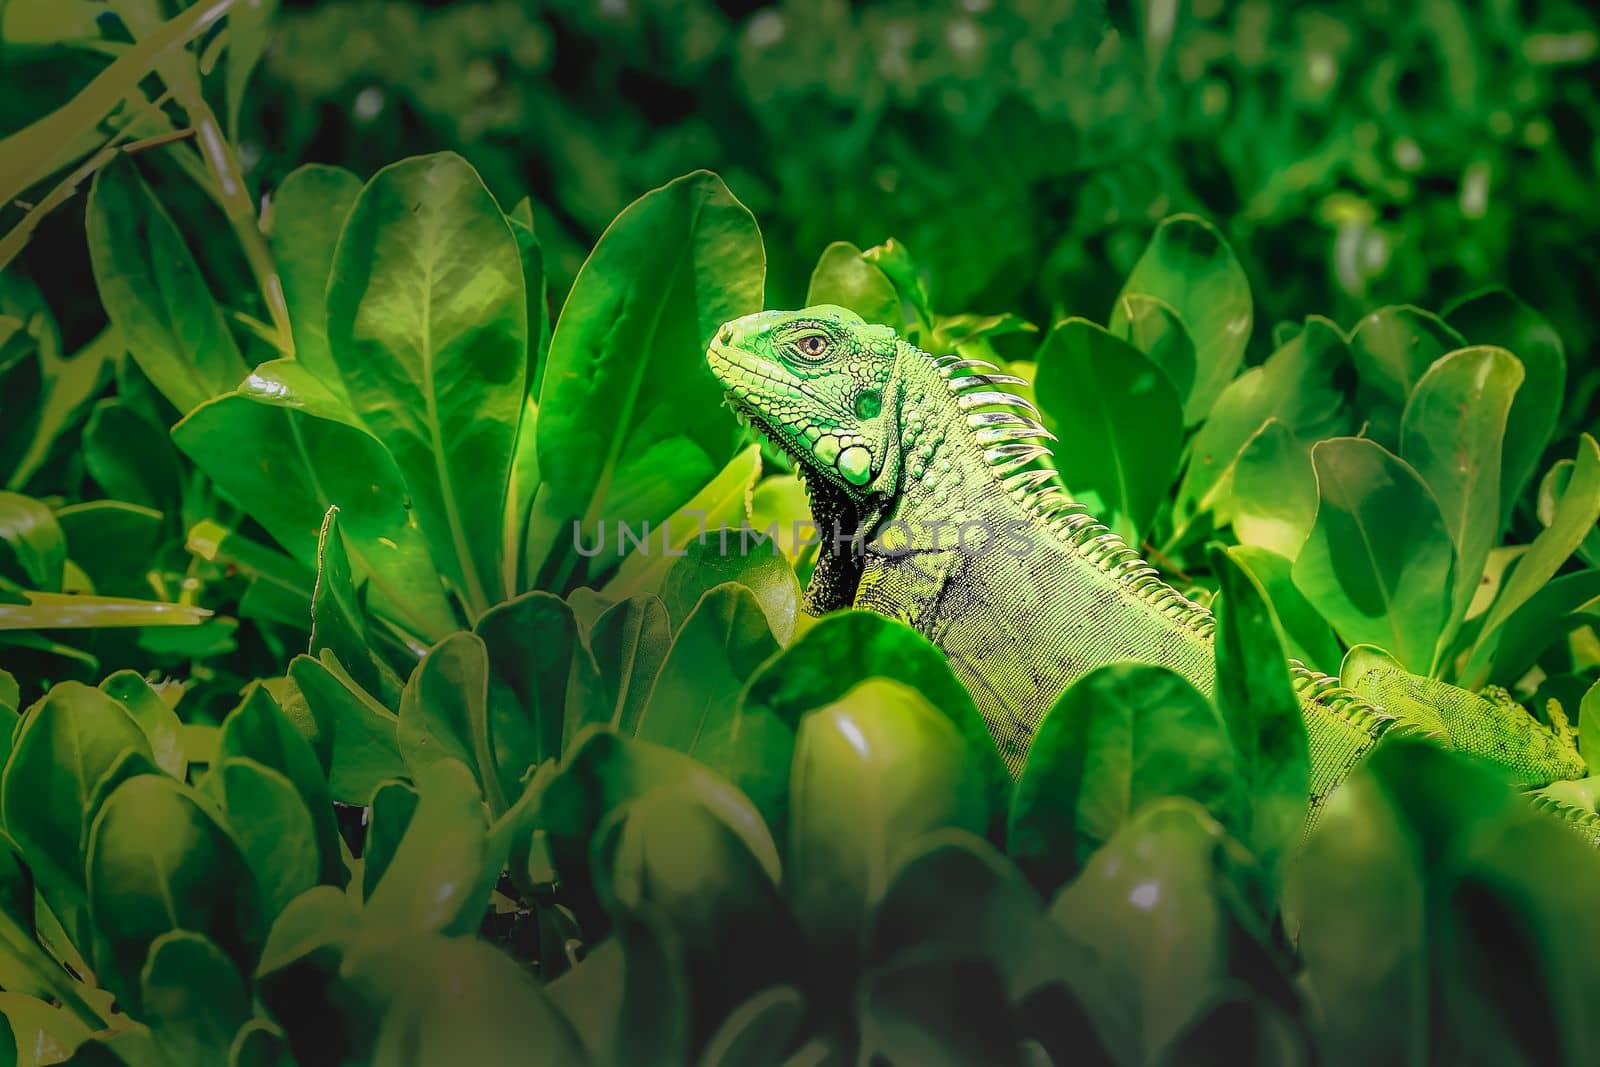 Green alertness and cute Iguana: camouflage in caribbean foliage, Cancun, Mexico